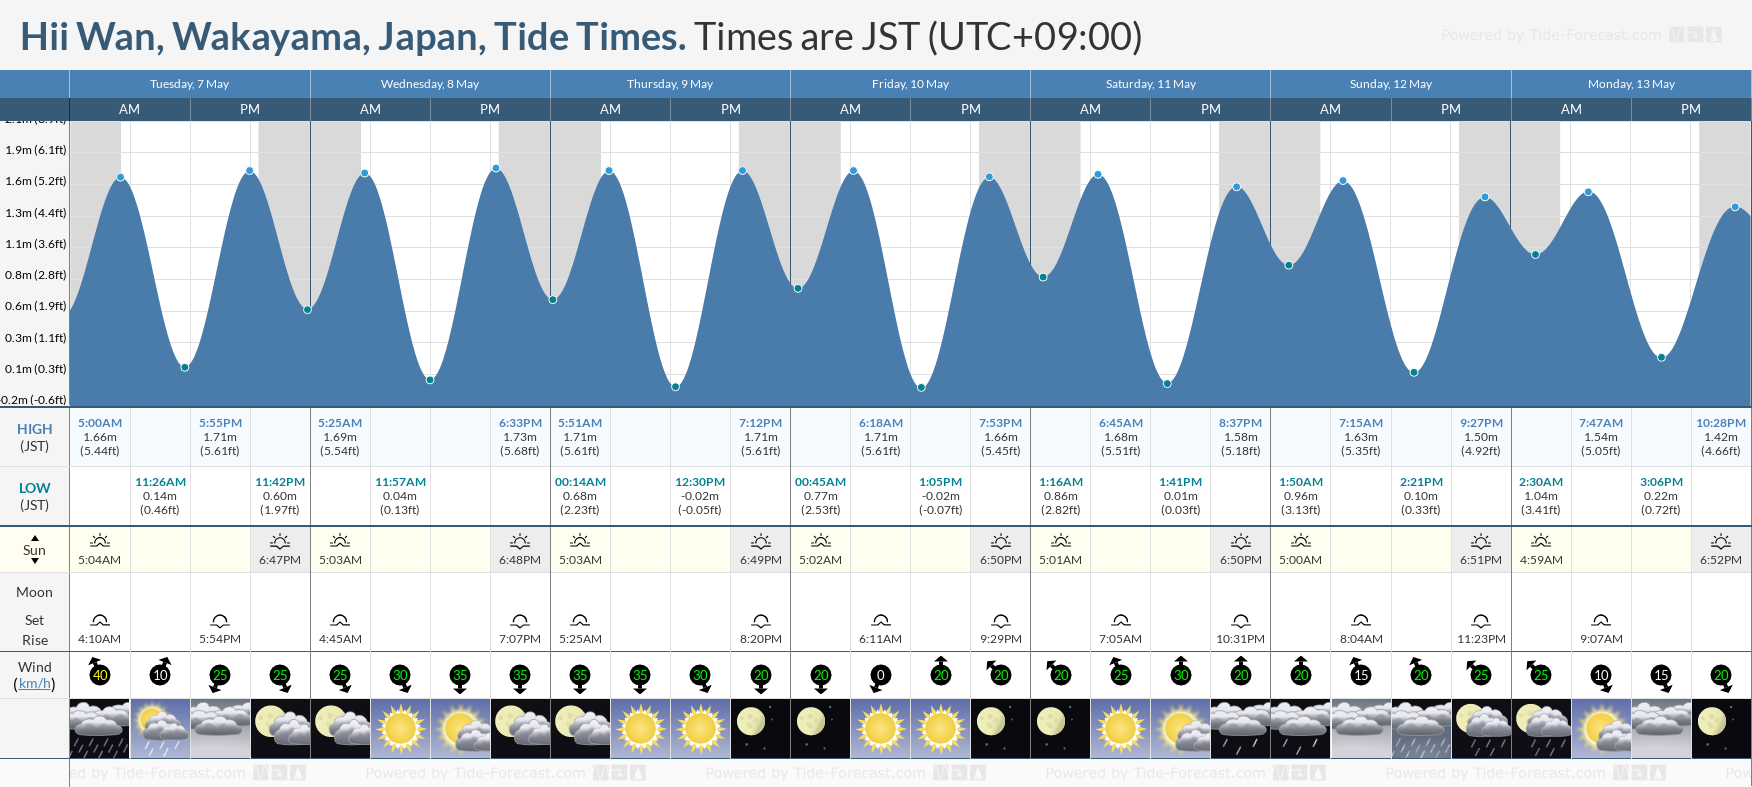 Hii Wan, Wakayama, Japan Tide Chart including high and low tide tide times for the next 7 days